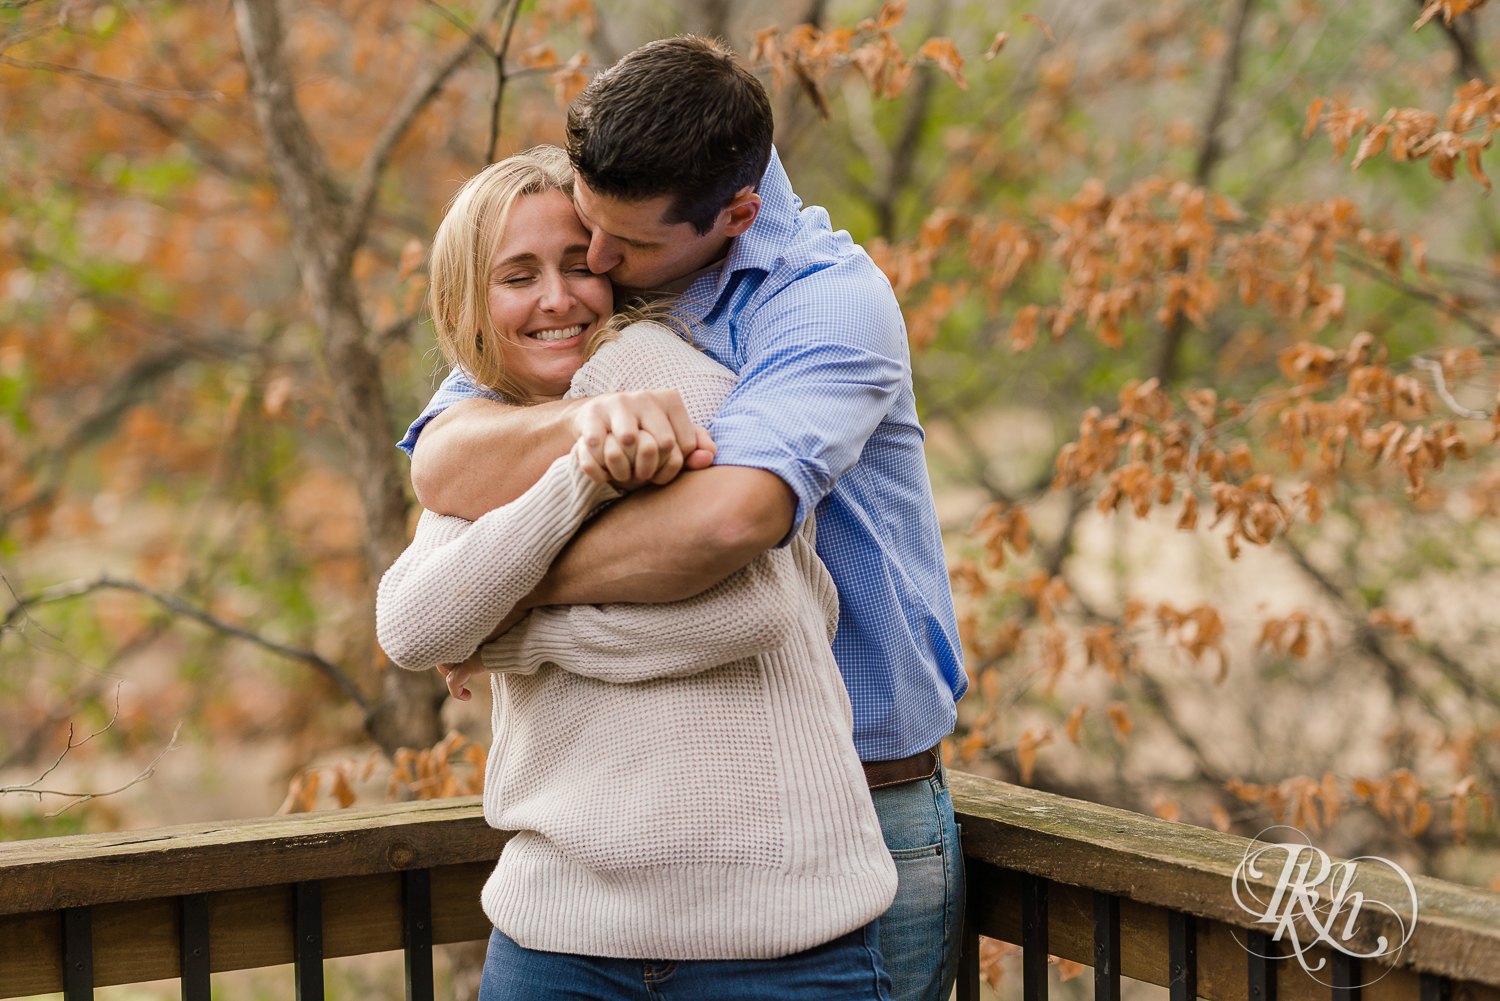 Man kisses blonde woman in leaves during fall engagement photography session in Chaska, Minnesota.